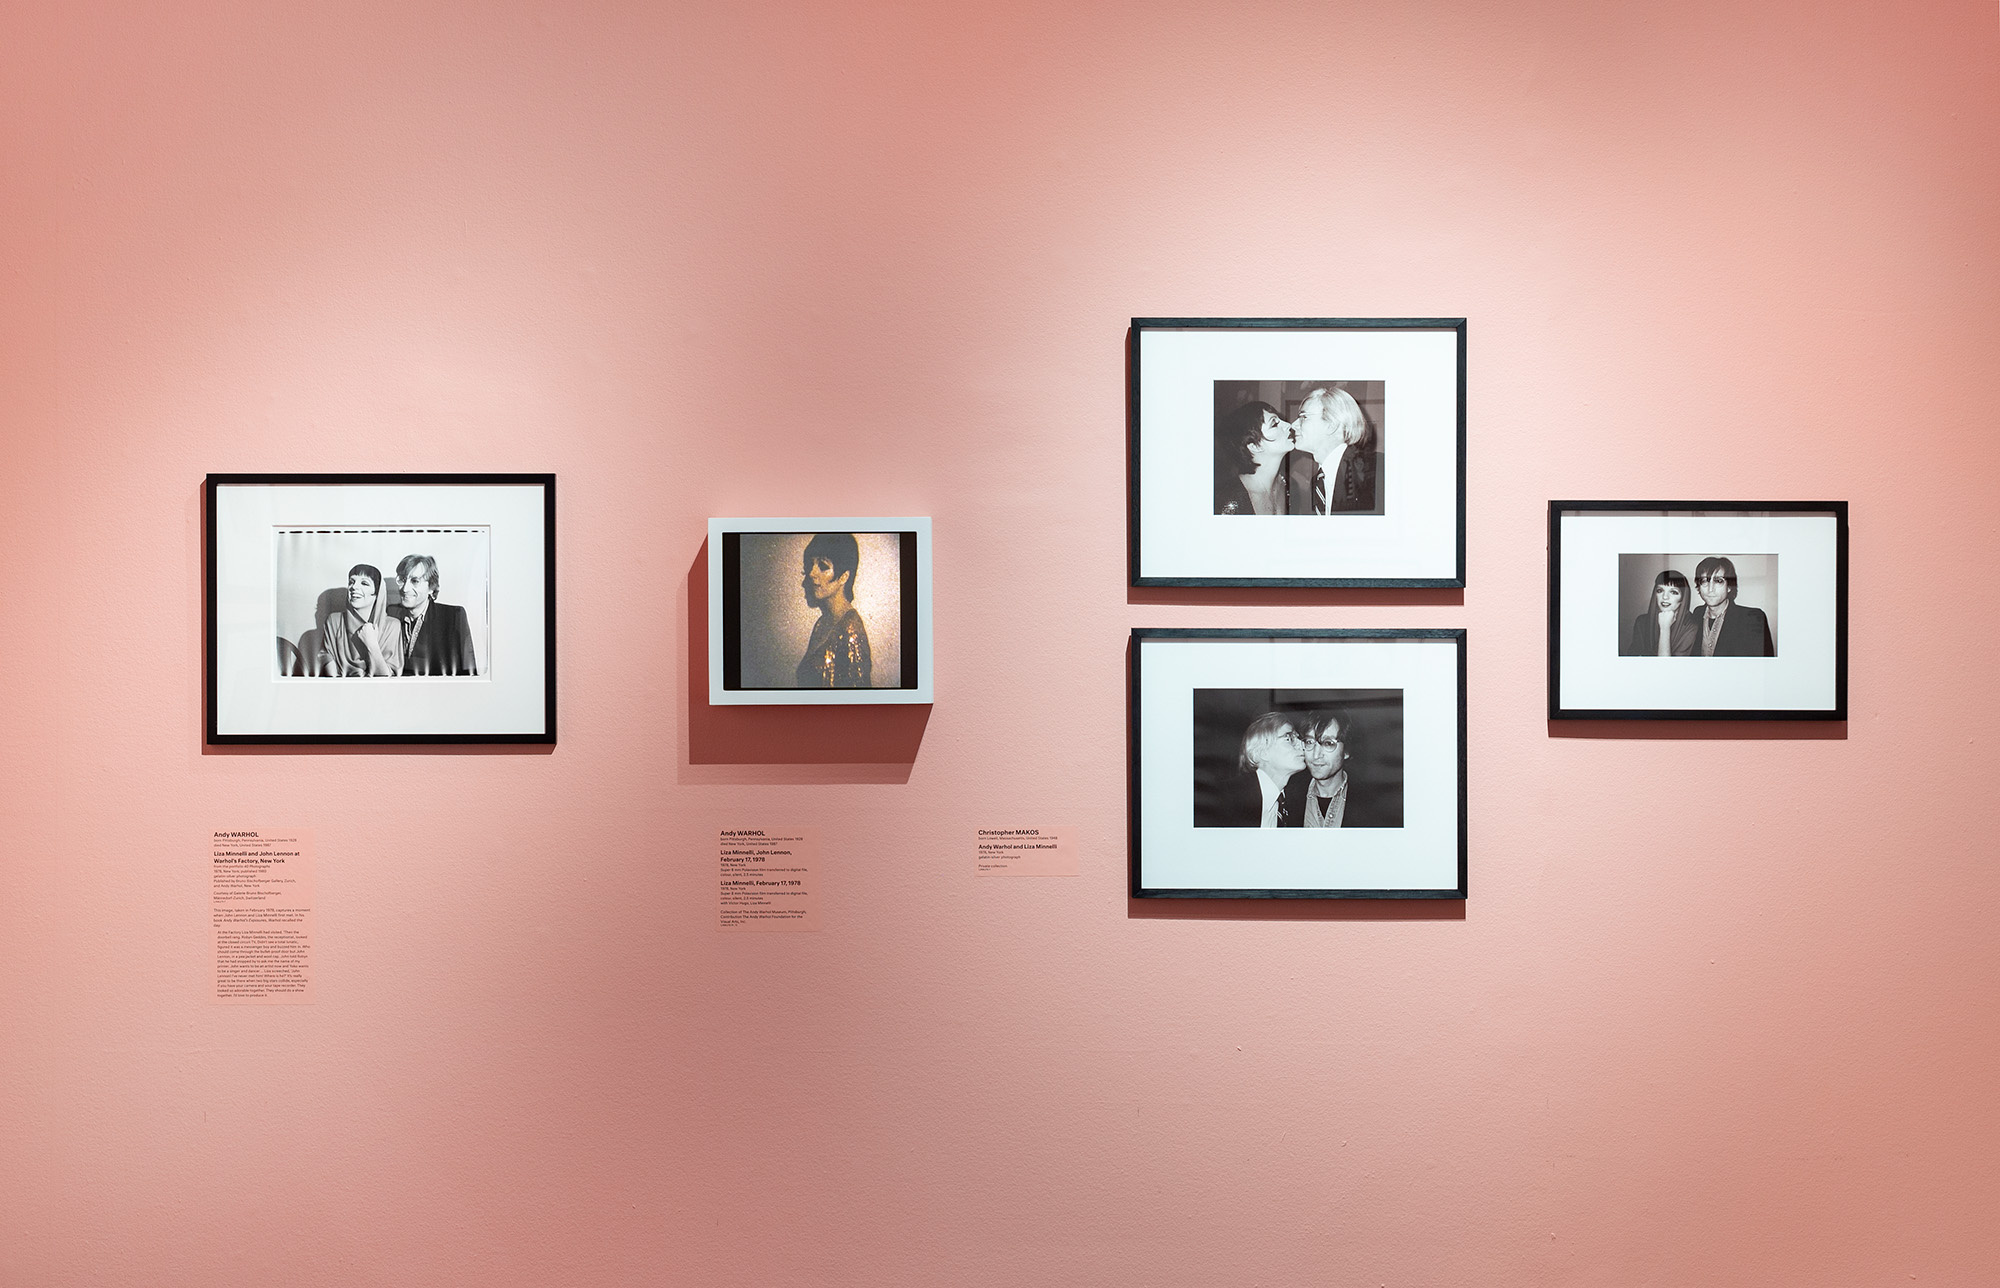 Installation view of <em>Andy Warhol and Photography: A Social Media</em>, Art Gallery of South Australia, Adelaide; photo: Saul Steed